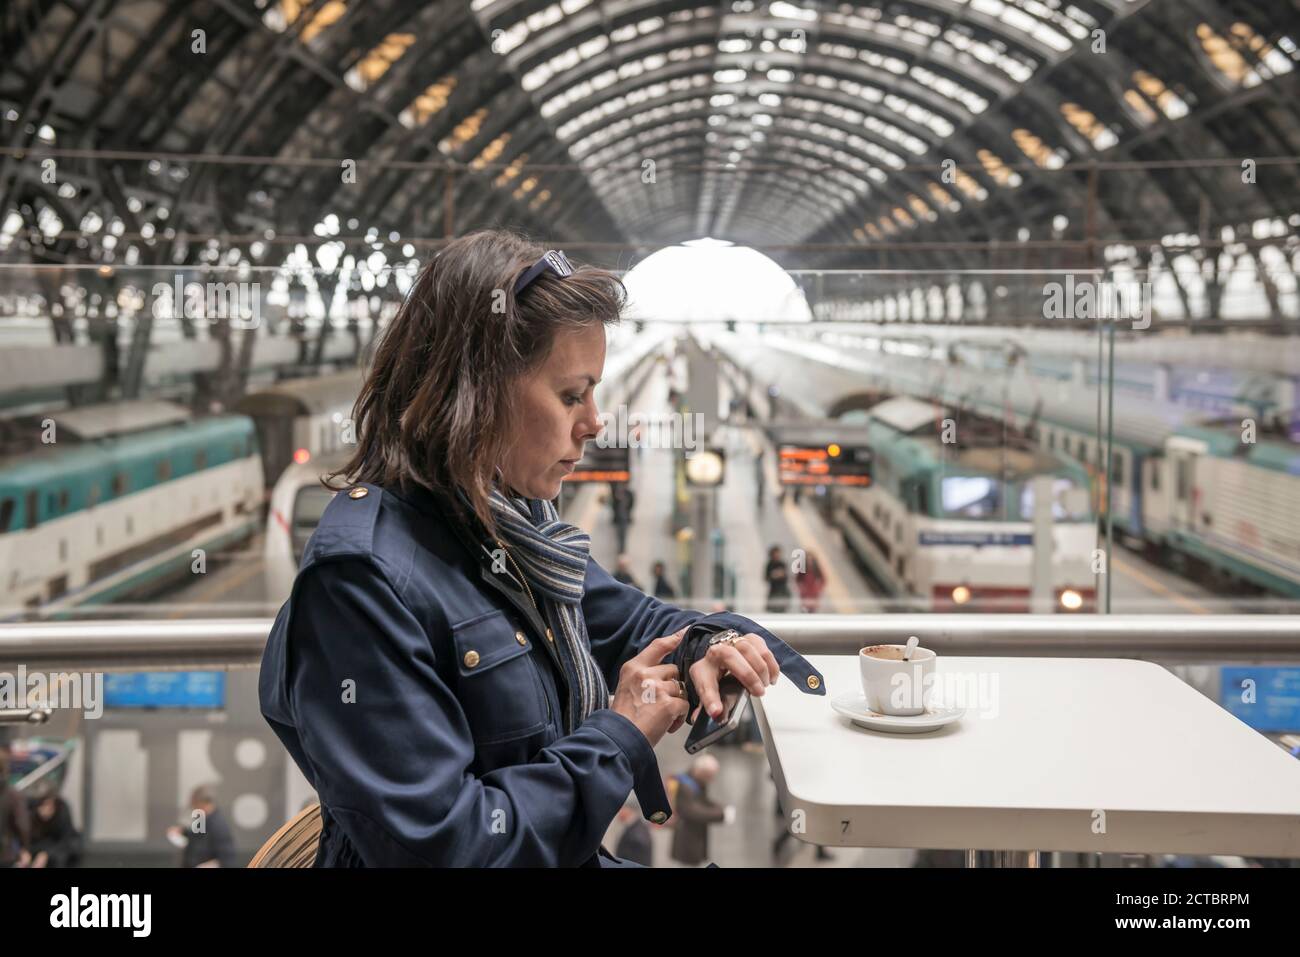 Woman Sitting in a Restaurant in Railroad Station in Milan, Italy. Stock Photo